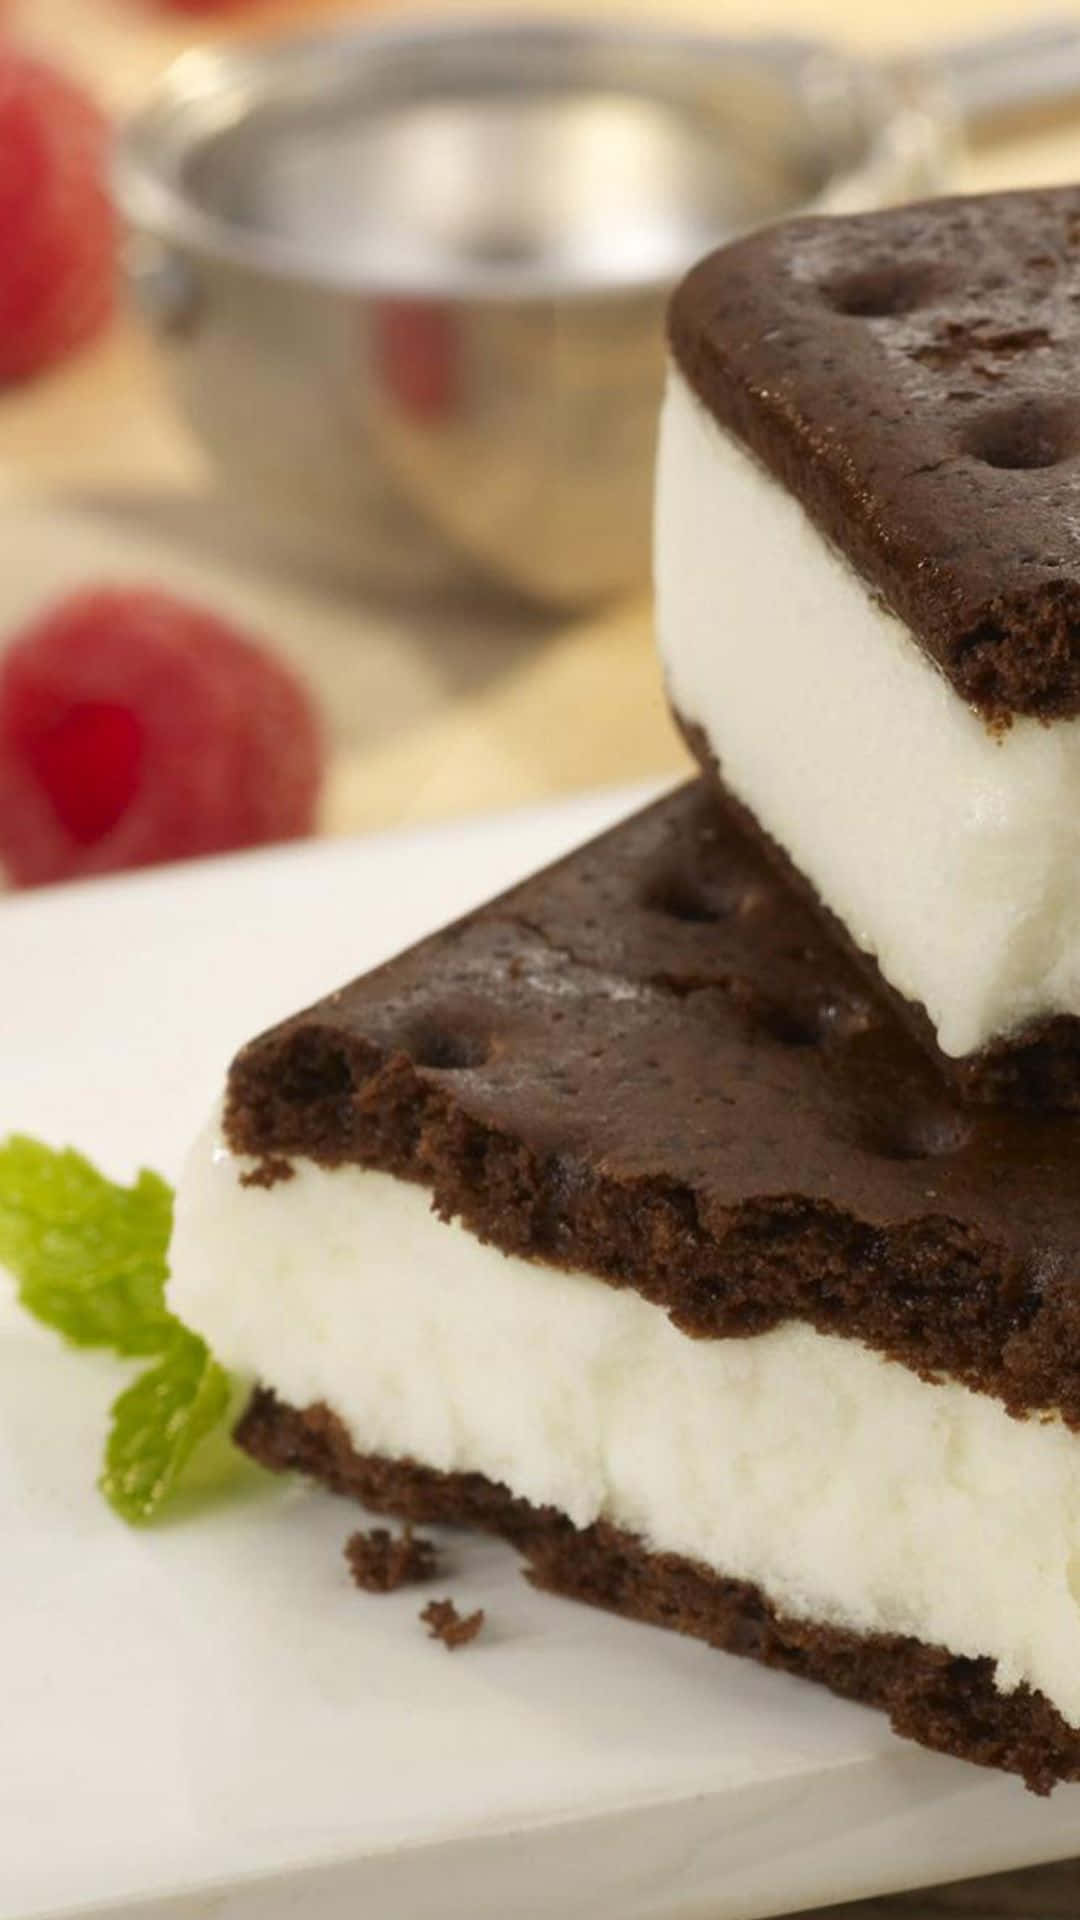 Indulge your sweet tooth with this delicious dessert